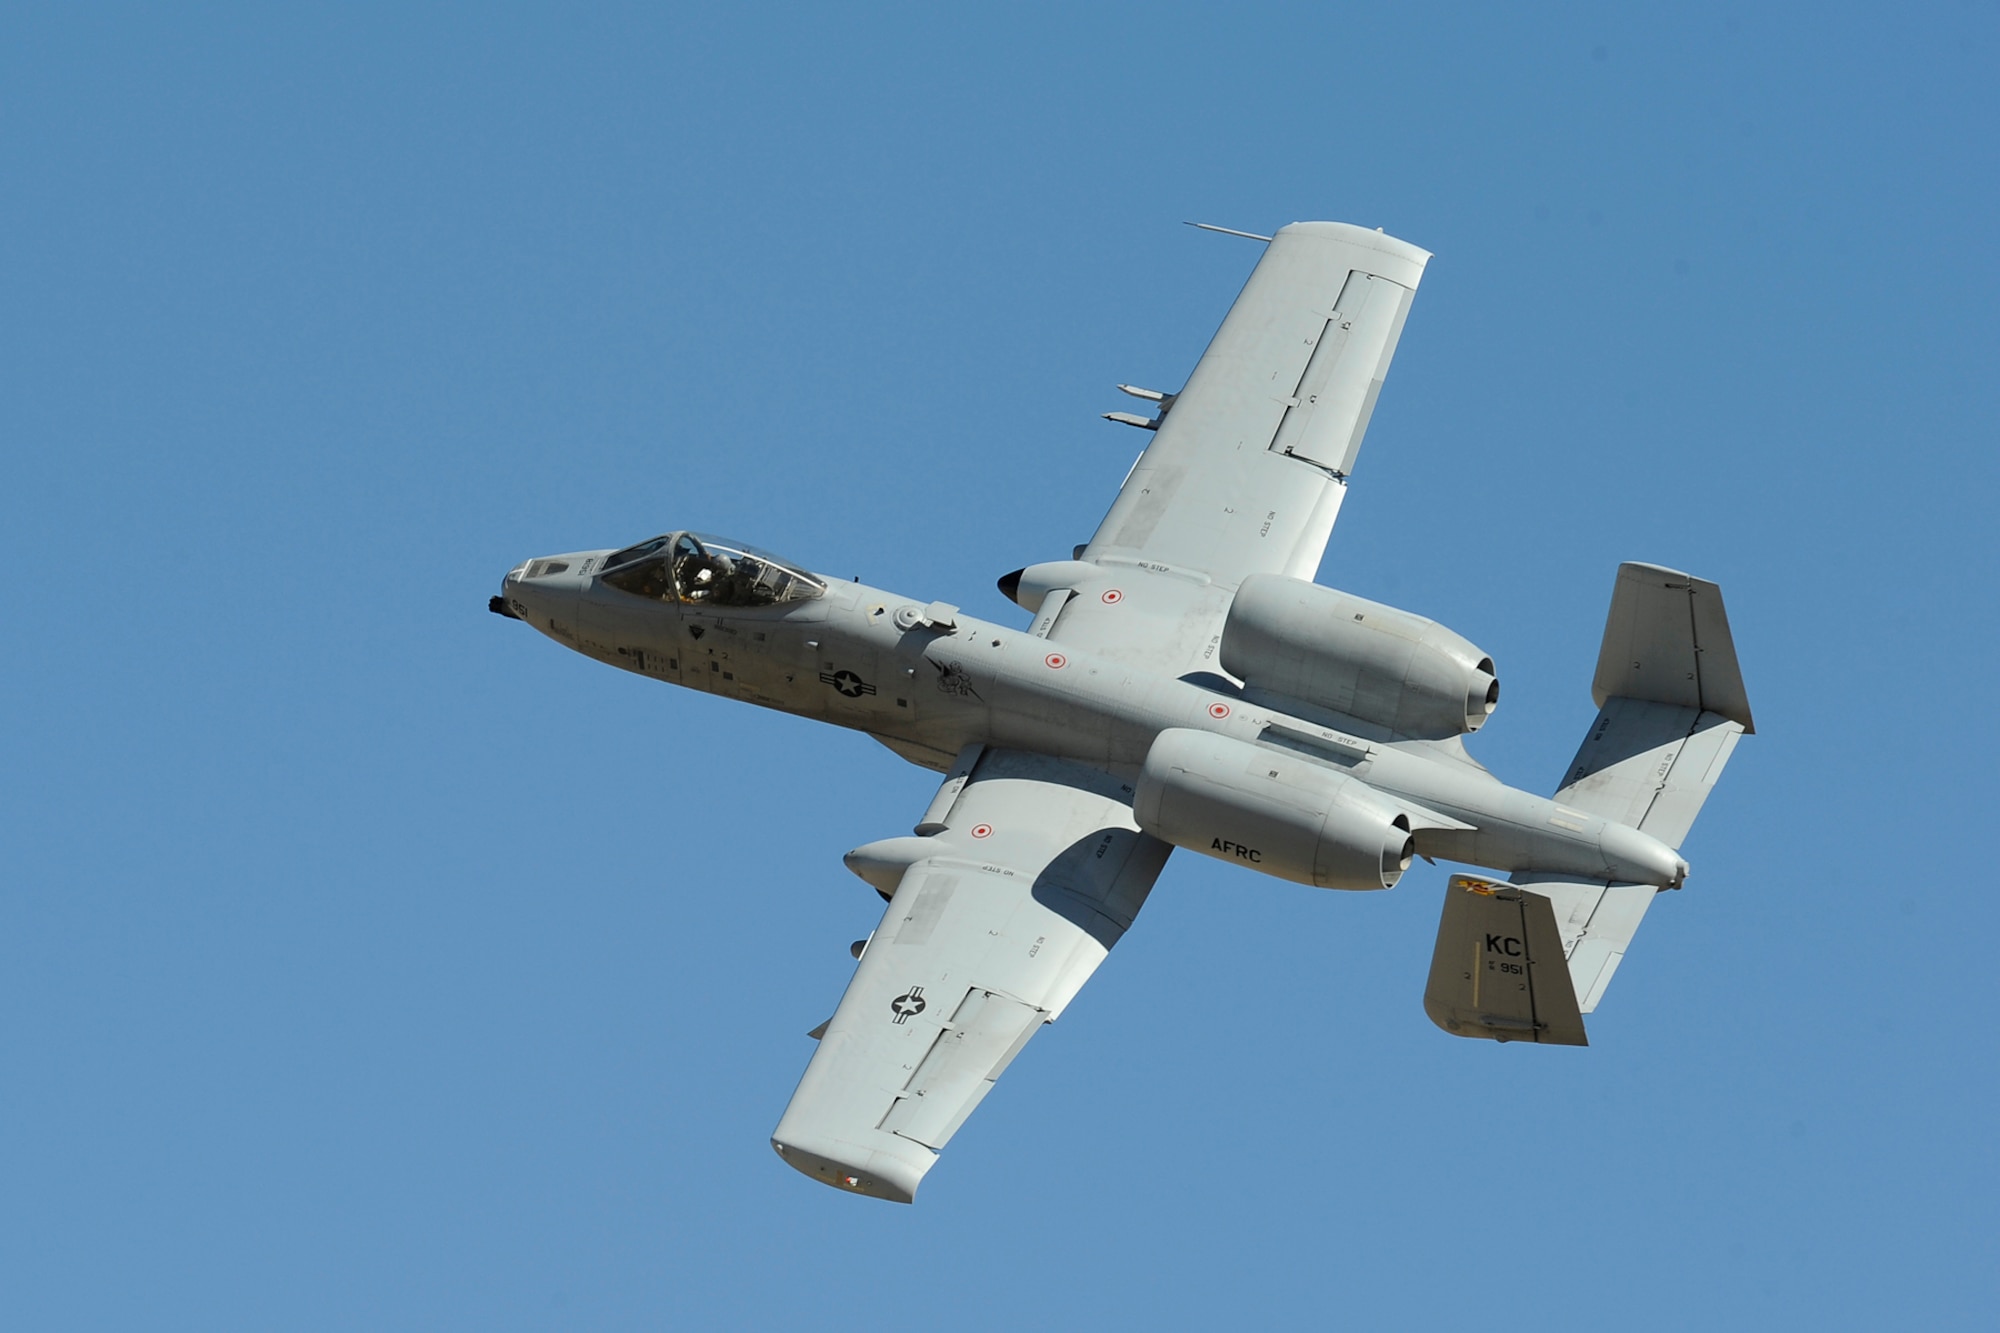 A 107th Fighter Squadron, A-10 Thunderbolt II soars across the sky during Hawgsmoke 2010.  The 107th Fighter Squadron, from 127th Wing at Selfridge Air National Guard Base, Mich., recently participated in the biennial A-10 Thunderbolt II bombing, missile and tactical gunnery competition known as Hawgsmoke.  This year's competition was held at Gowen Air National Guard Base, Boise, Idaho from Oct. 13 to 16.  The competition allows A-10 pilots and maintenance personnel to test their skills through friendly competition.  (USAF Photo by MSgt. Terry Atwell) (Released)